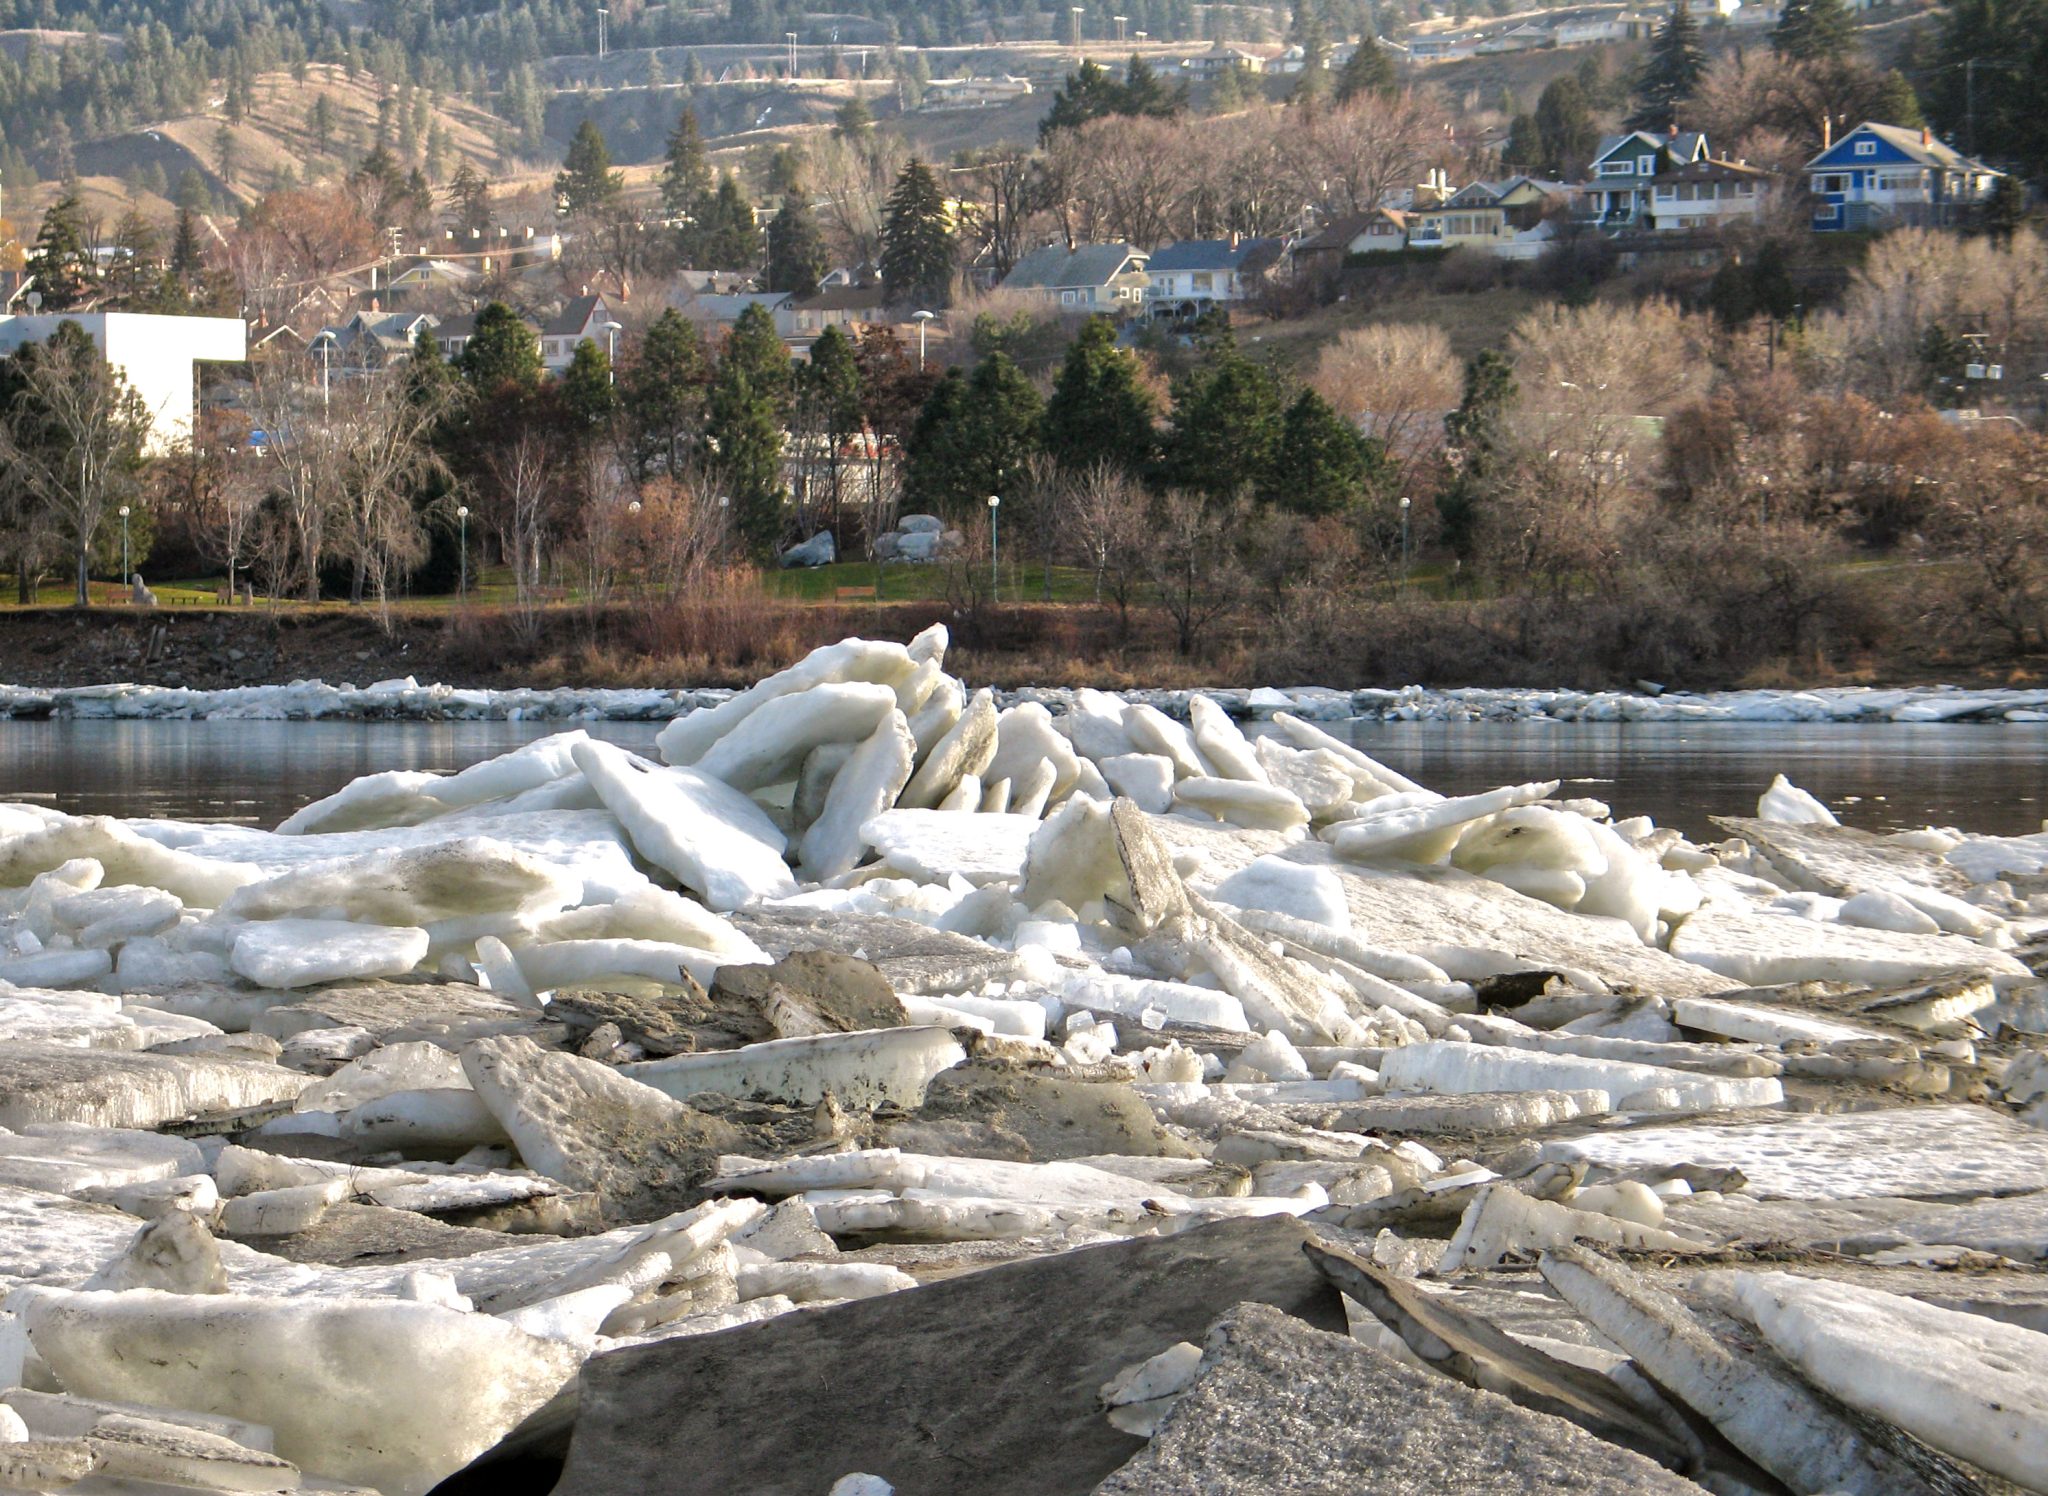 Ice flow breakup at the meeting of the North and South Thompson Rivers in Kamloops, BC, Canada